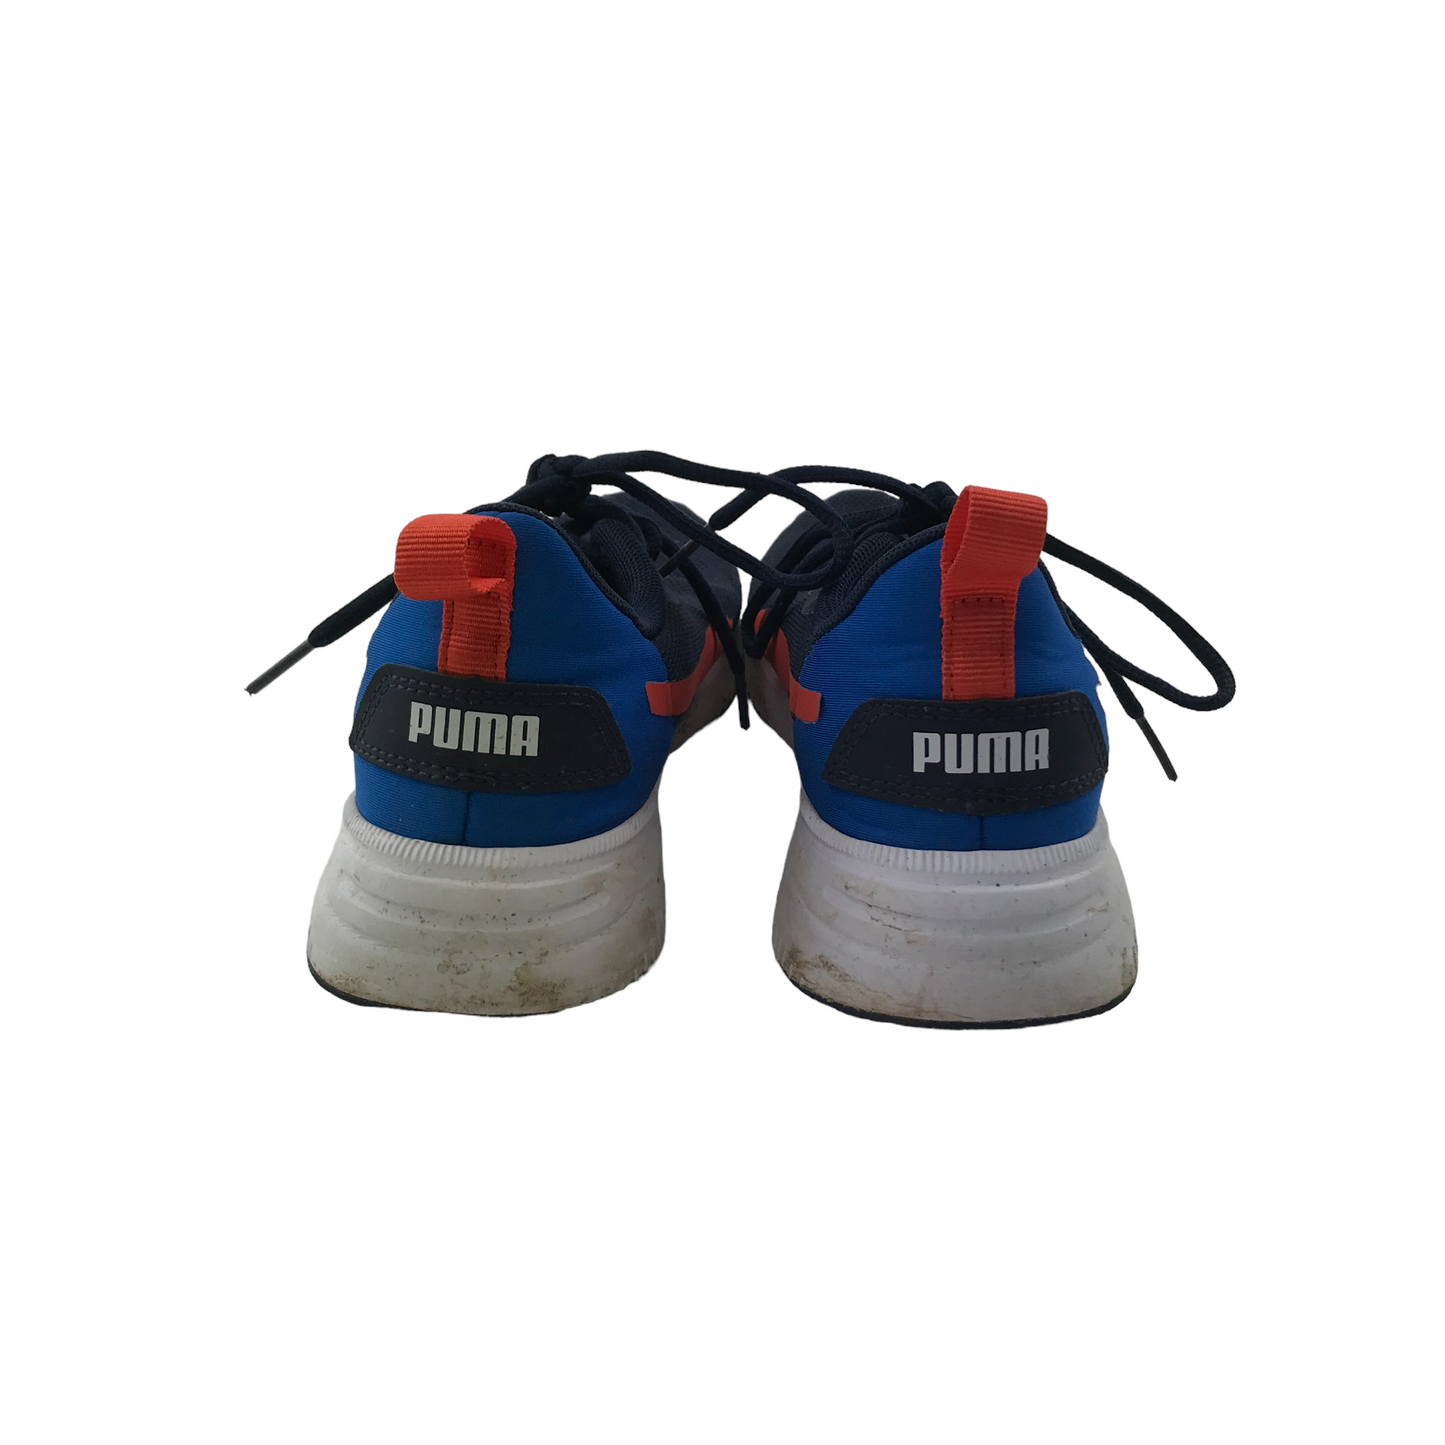 Puma Navy Red and Blue Trainers Shoe Size 4